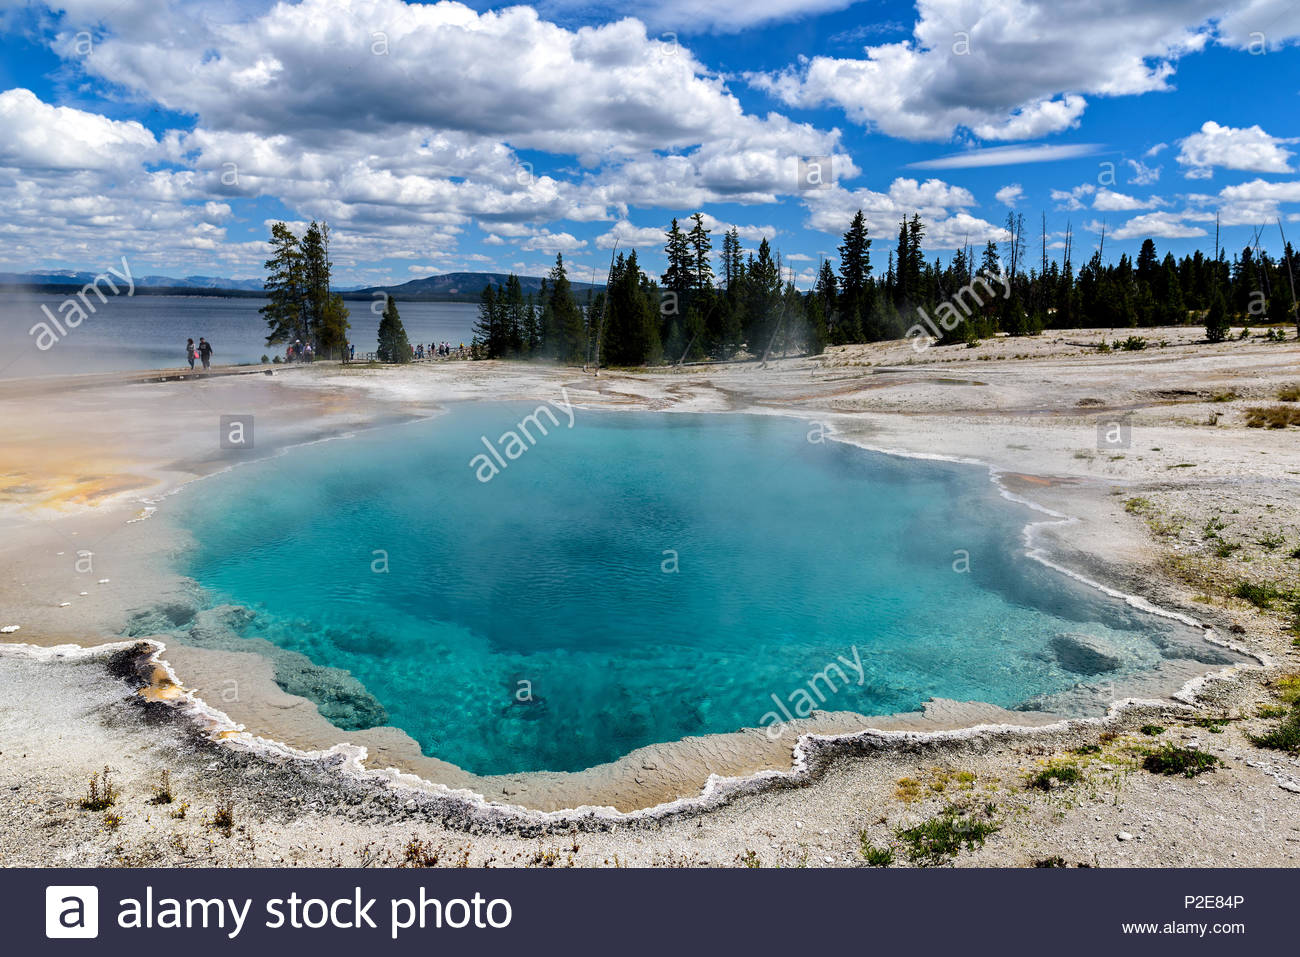 The Black Pool With Yellowstone Lake In Background